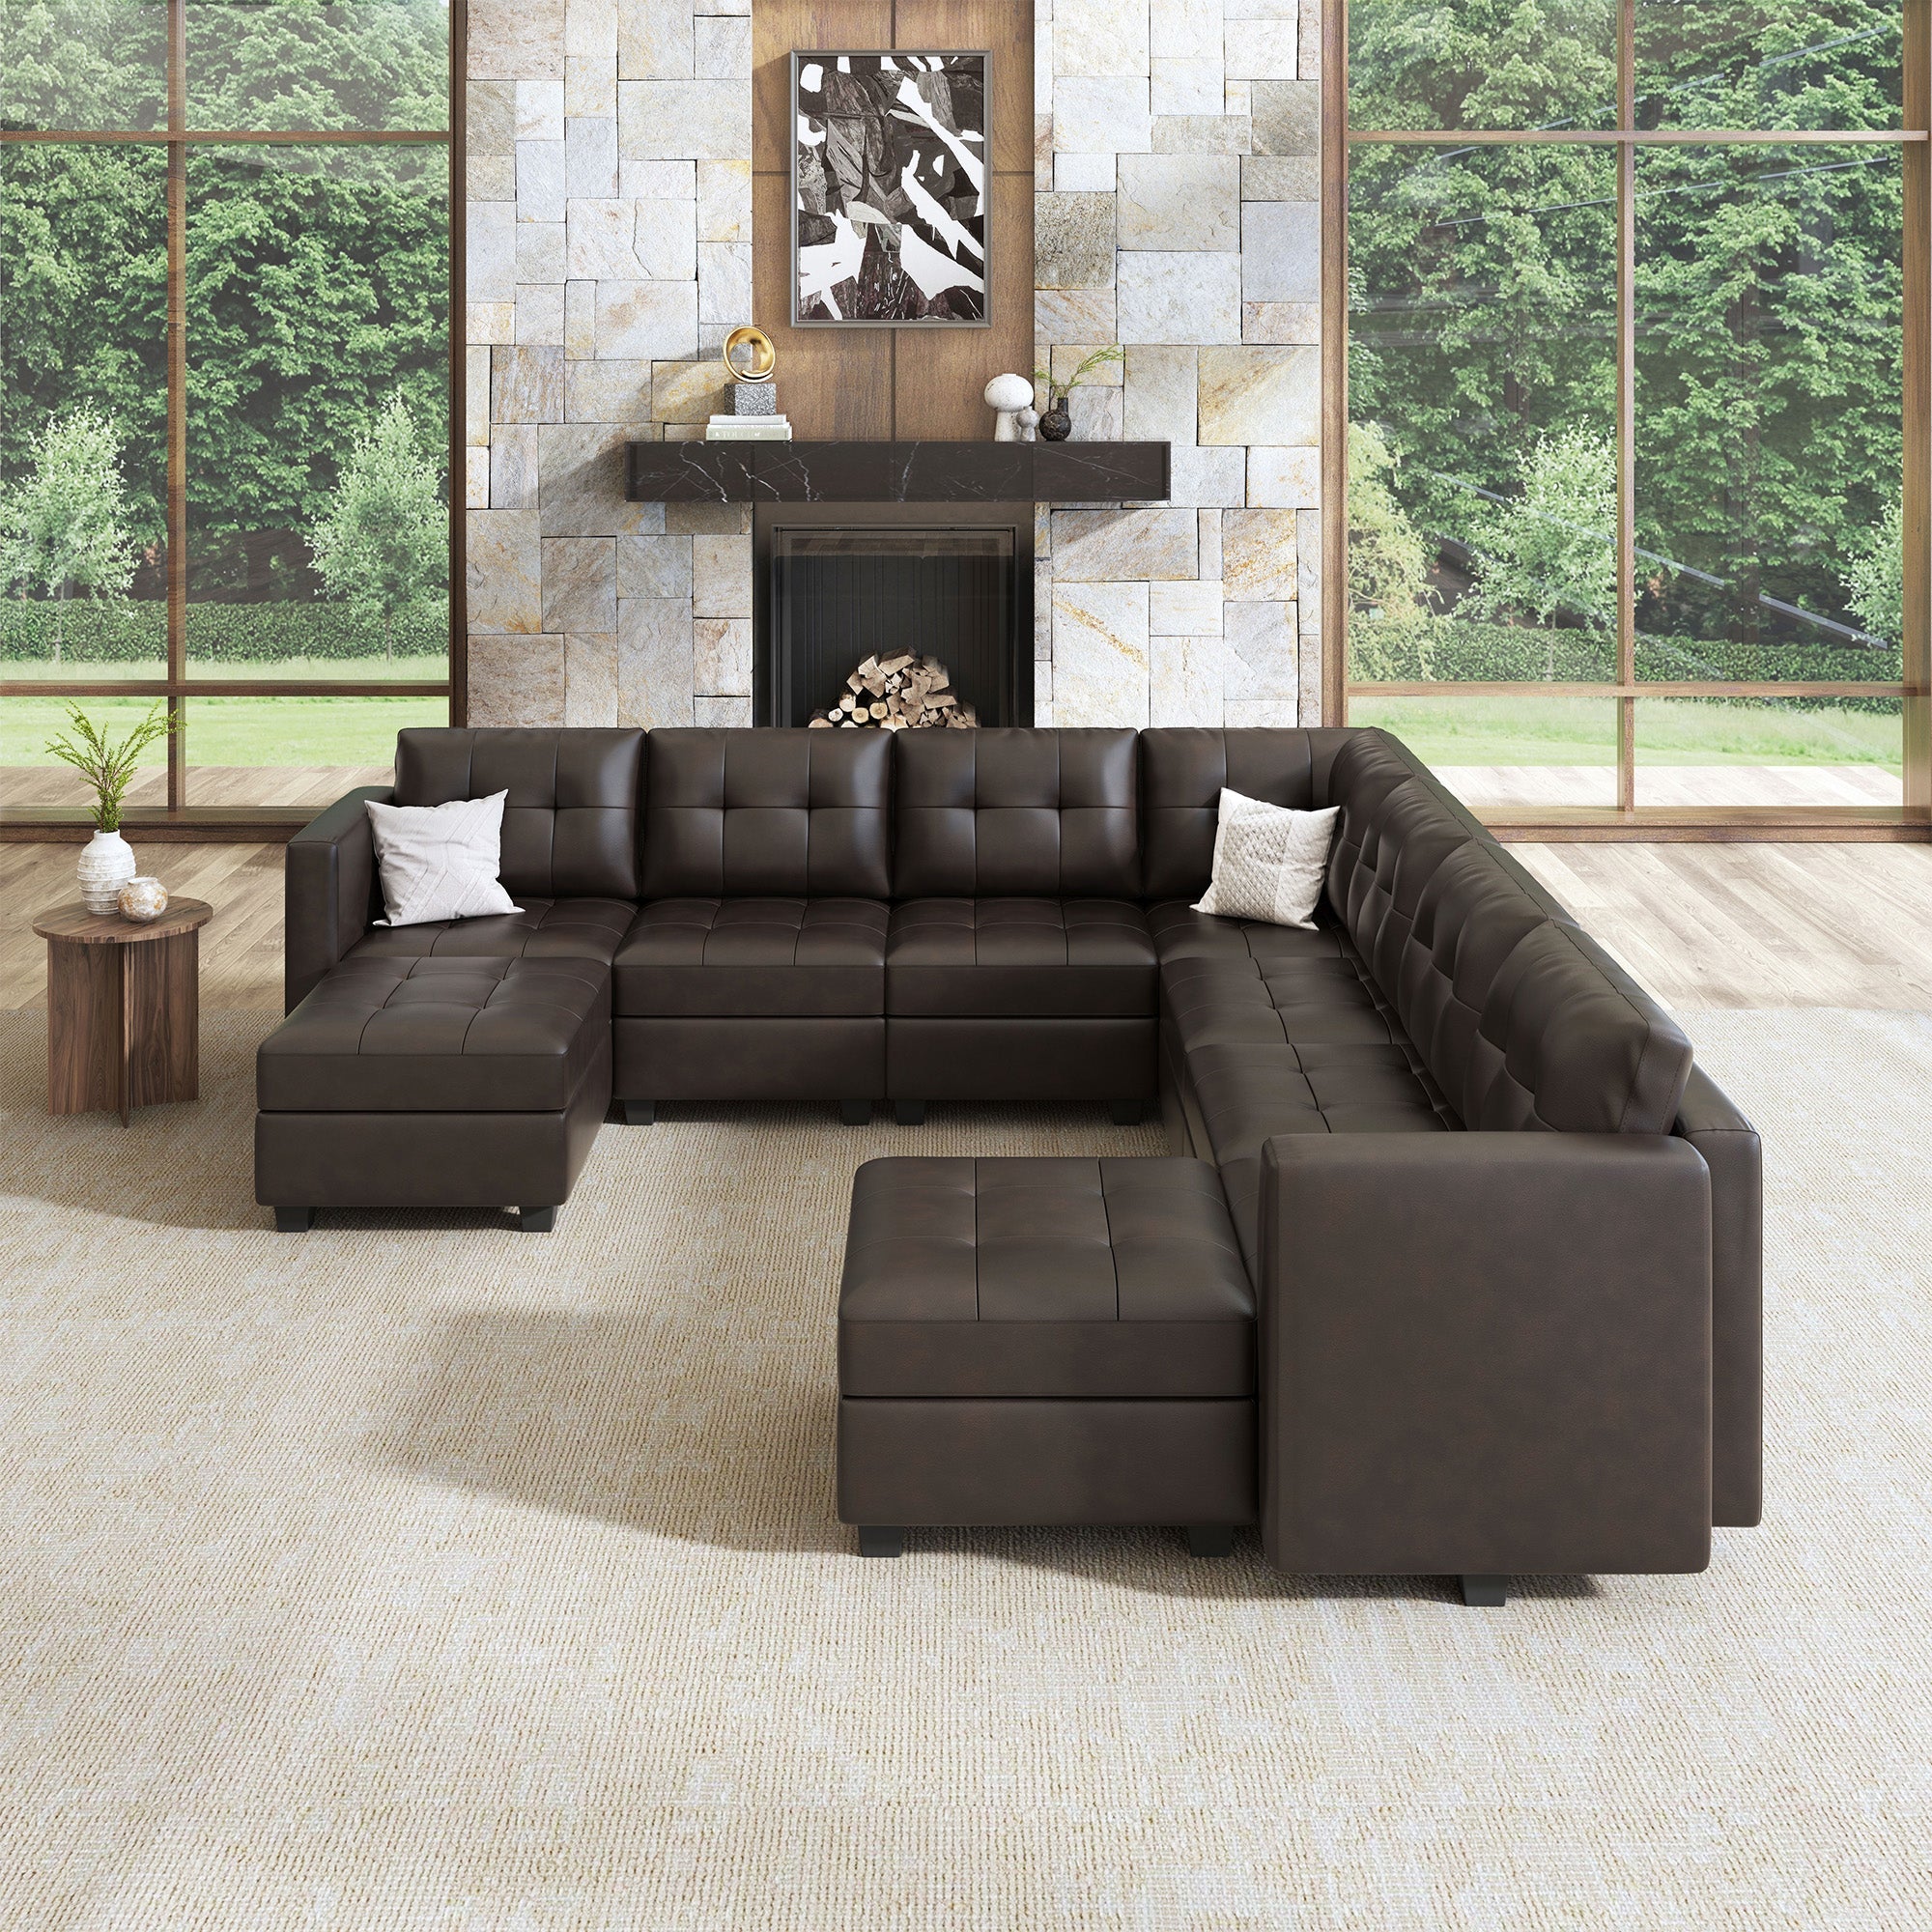 HONBAY 9-Piece Faux Leather Modular Sleeper Sectional With Storage Seat